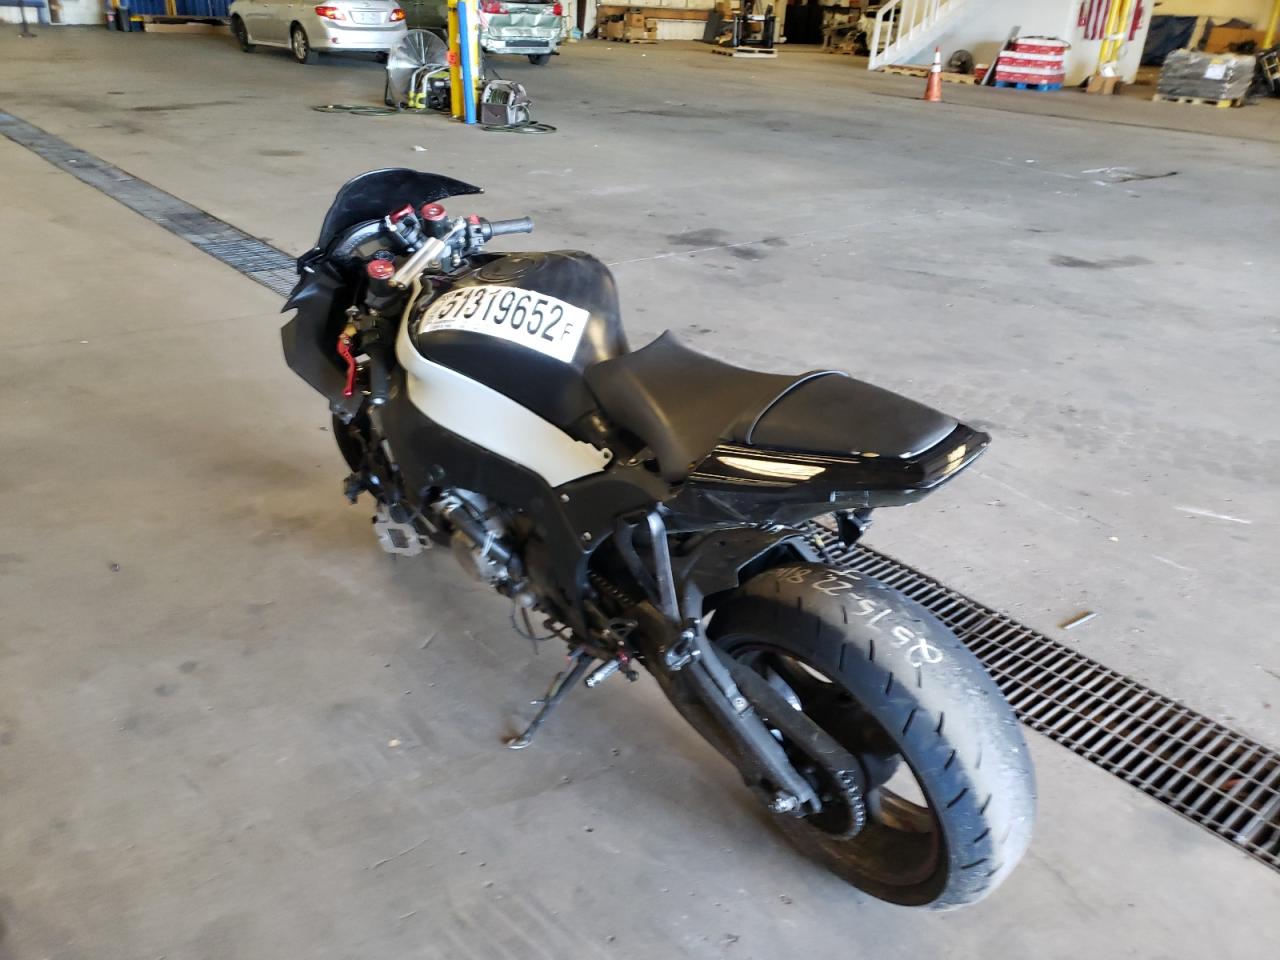 2012 Kawasaki ZX1000 J for sale at Copart Denver, CO. Lot #51319 